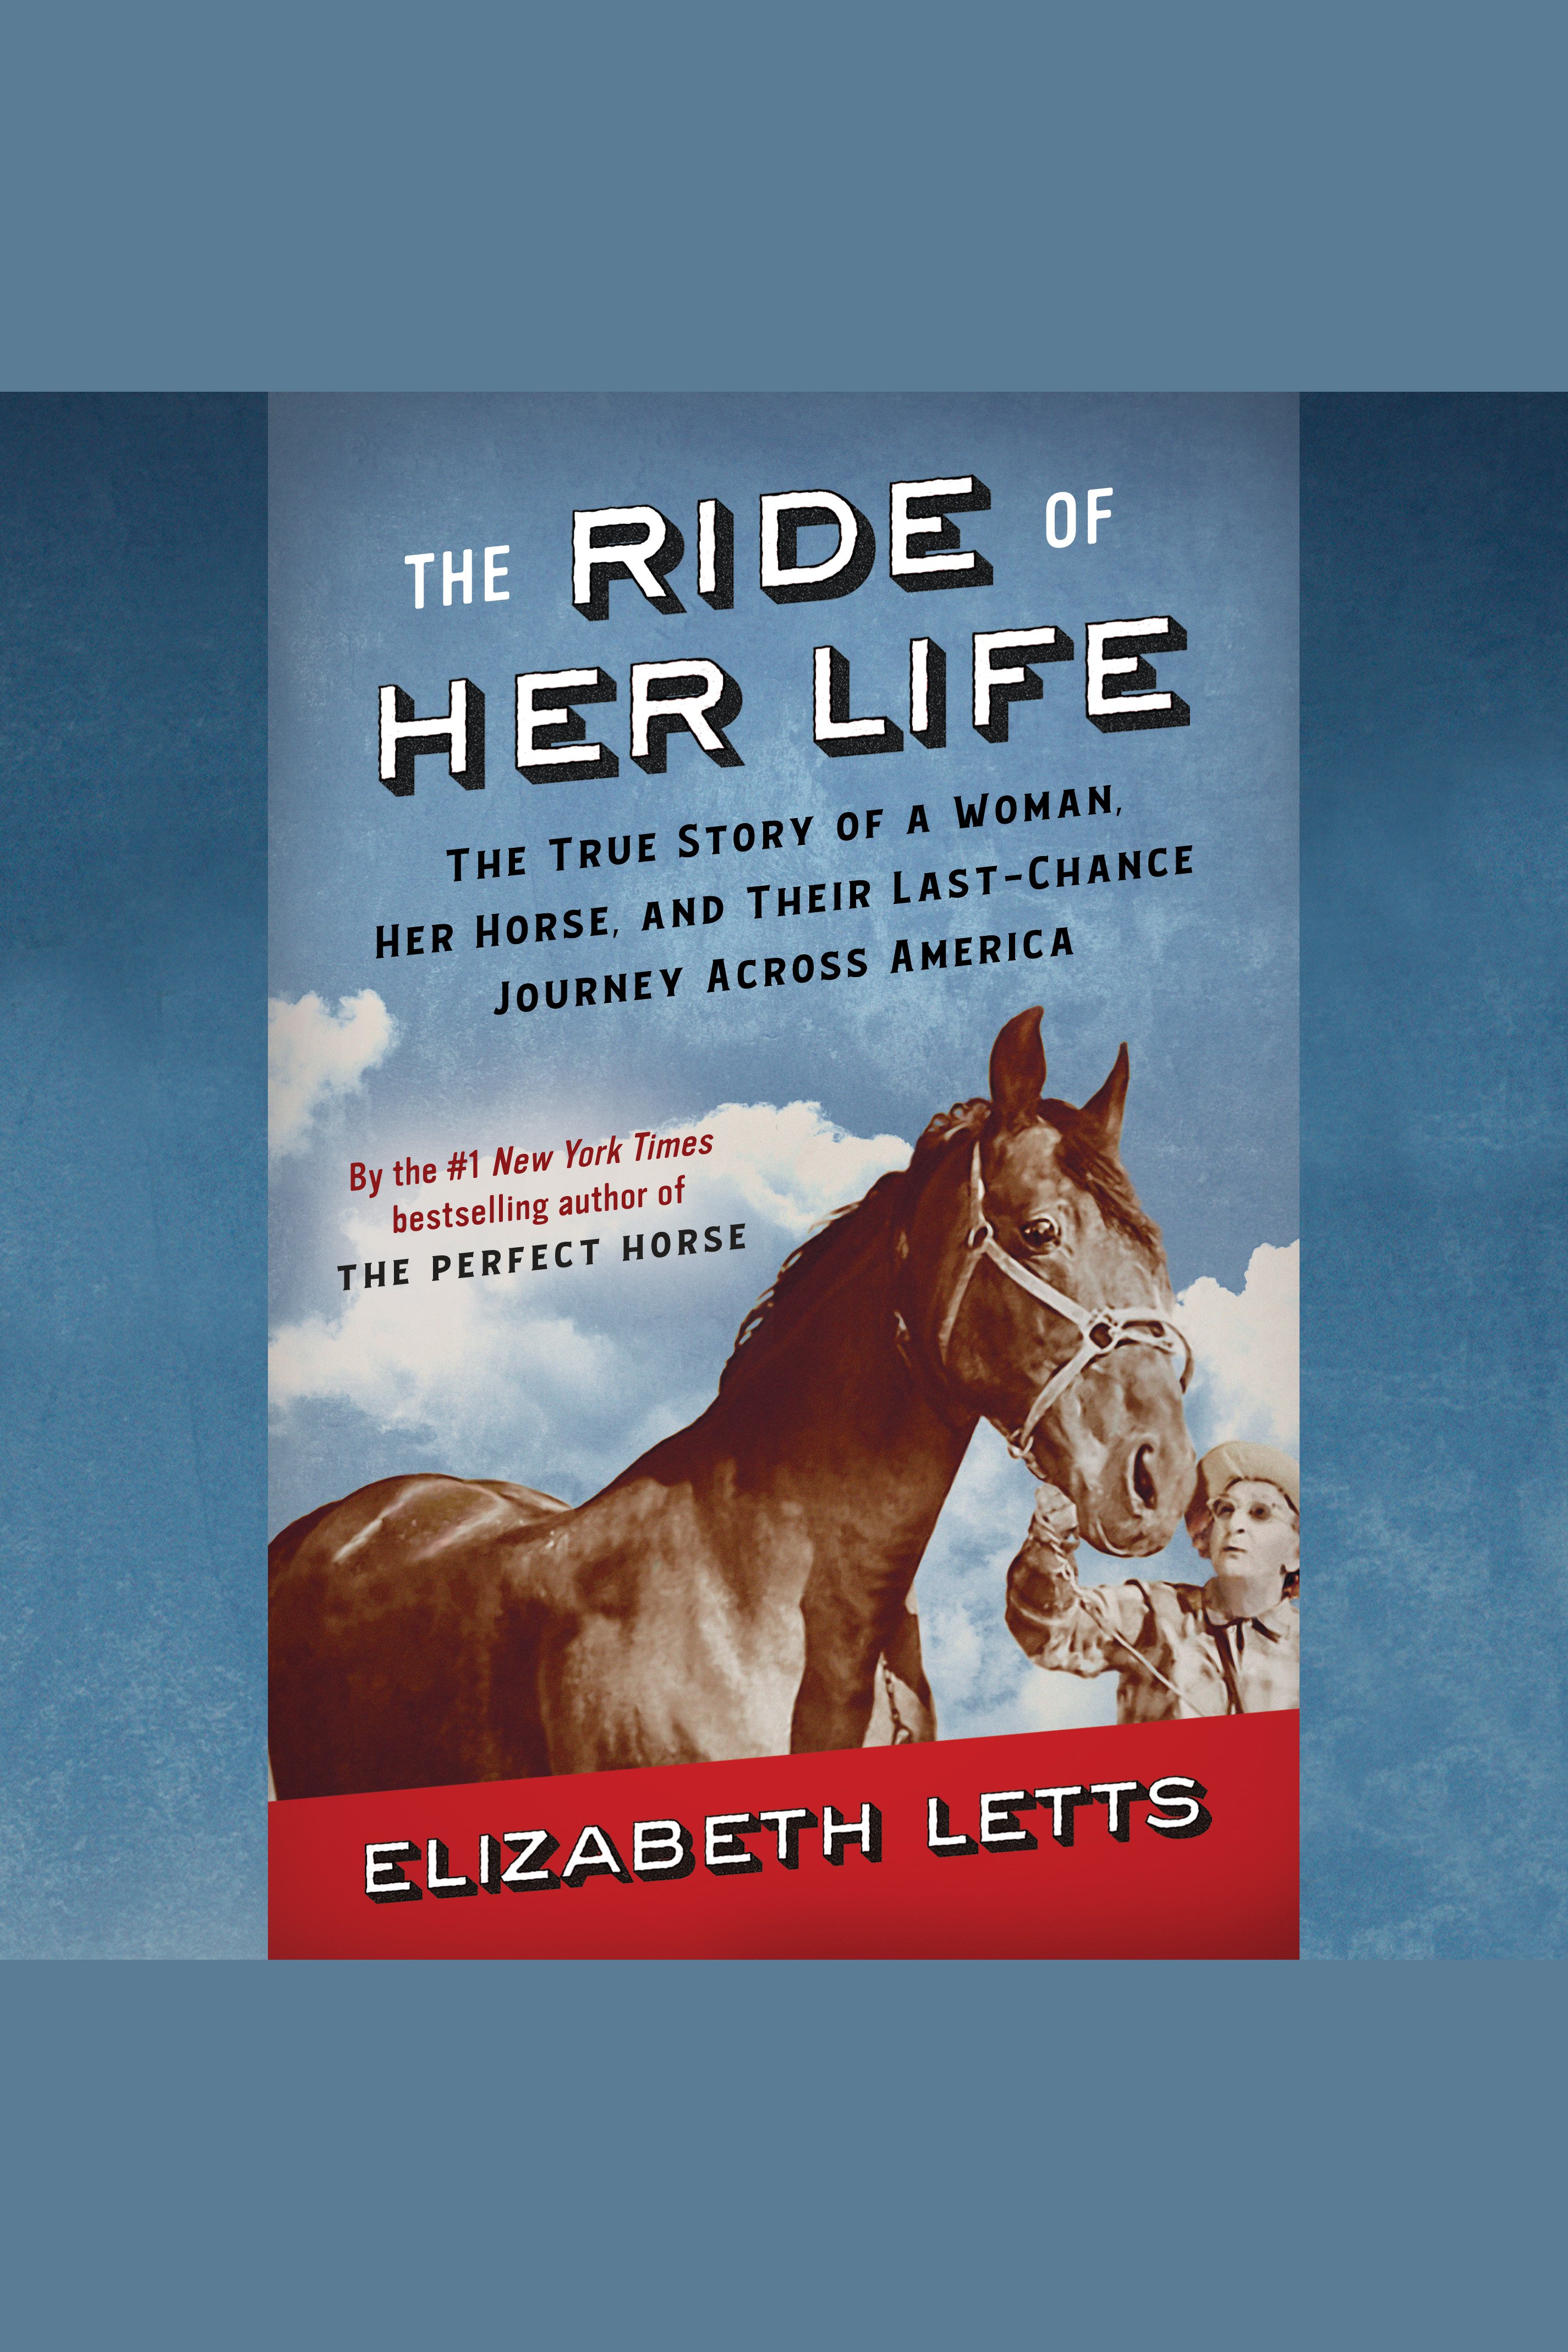 Image de couverture de The Ride of Her Life [electronic resource] : The True Story of a Woman, Her Horse, and Their Last-Chance Journey Across America